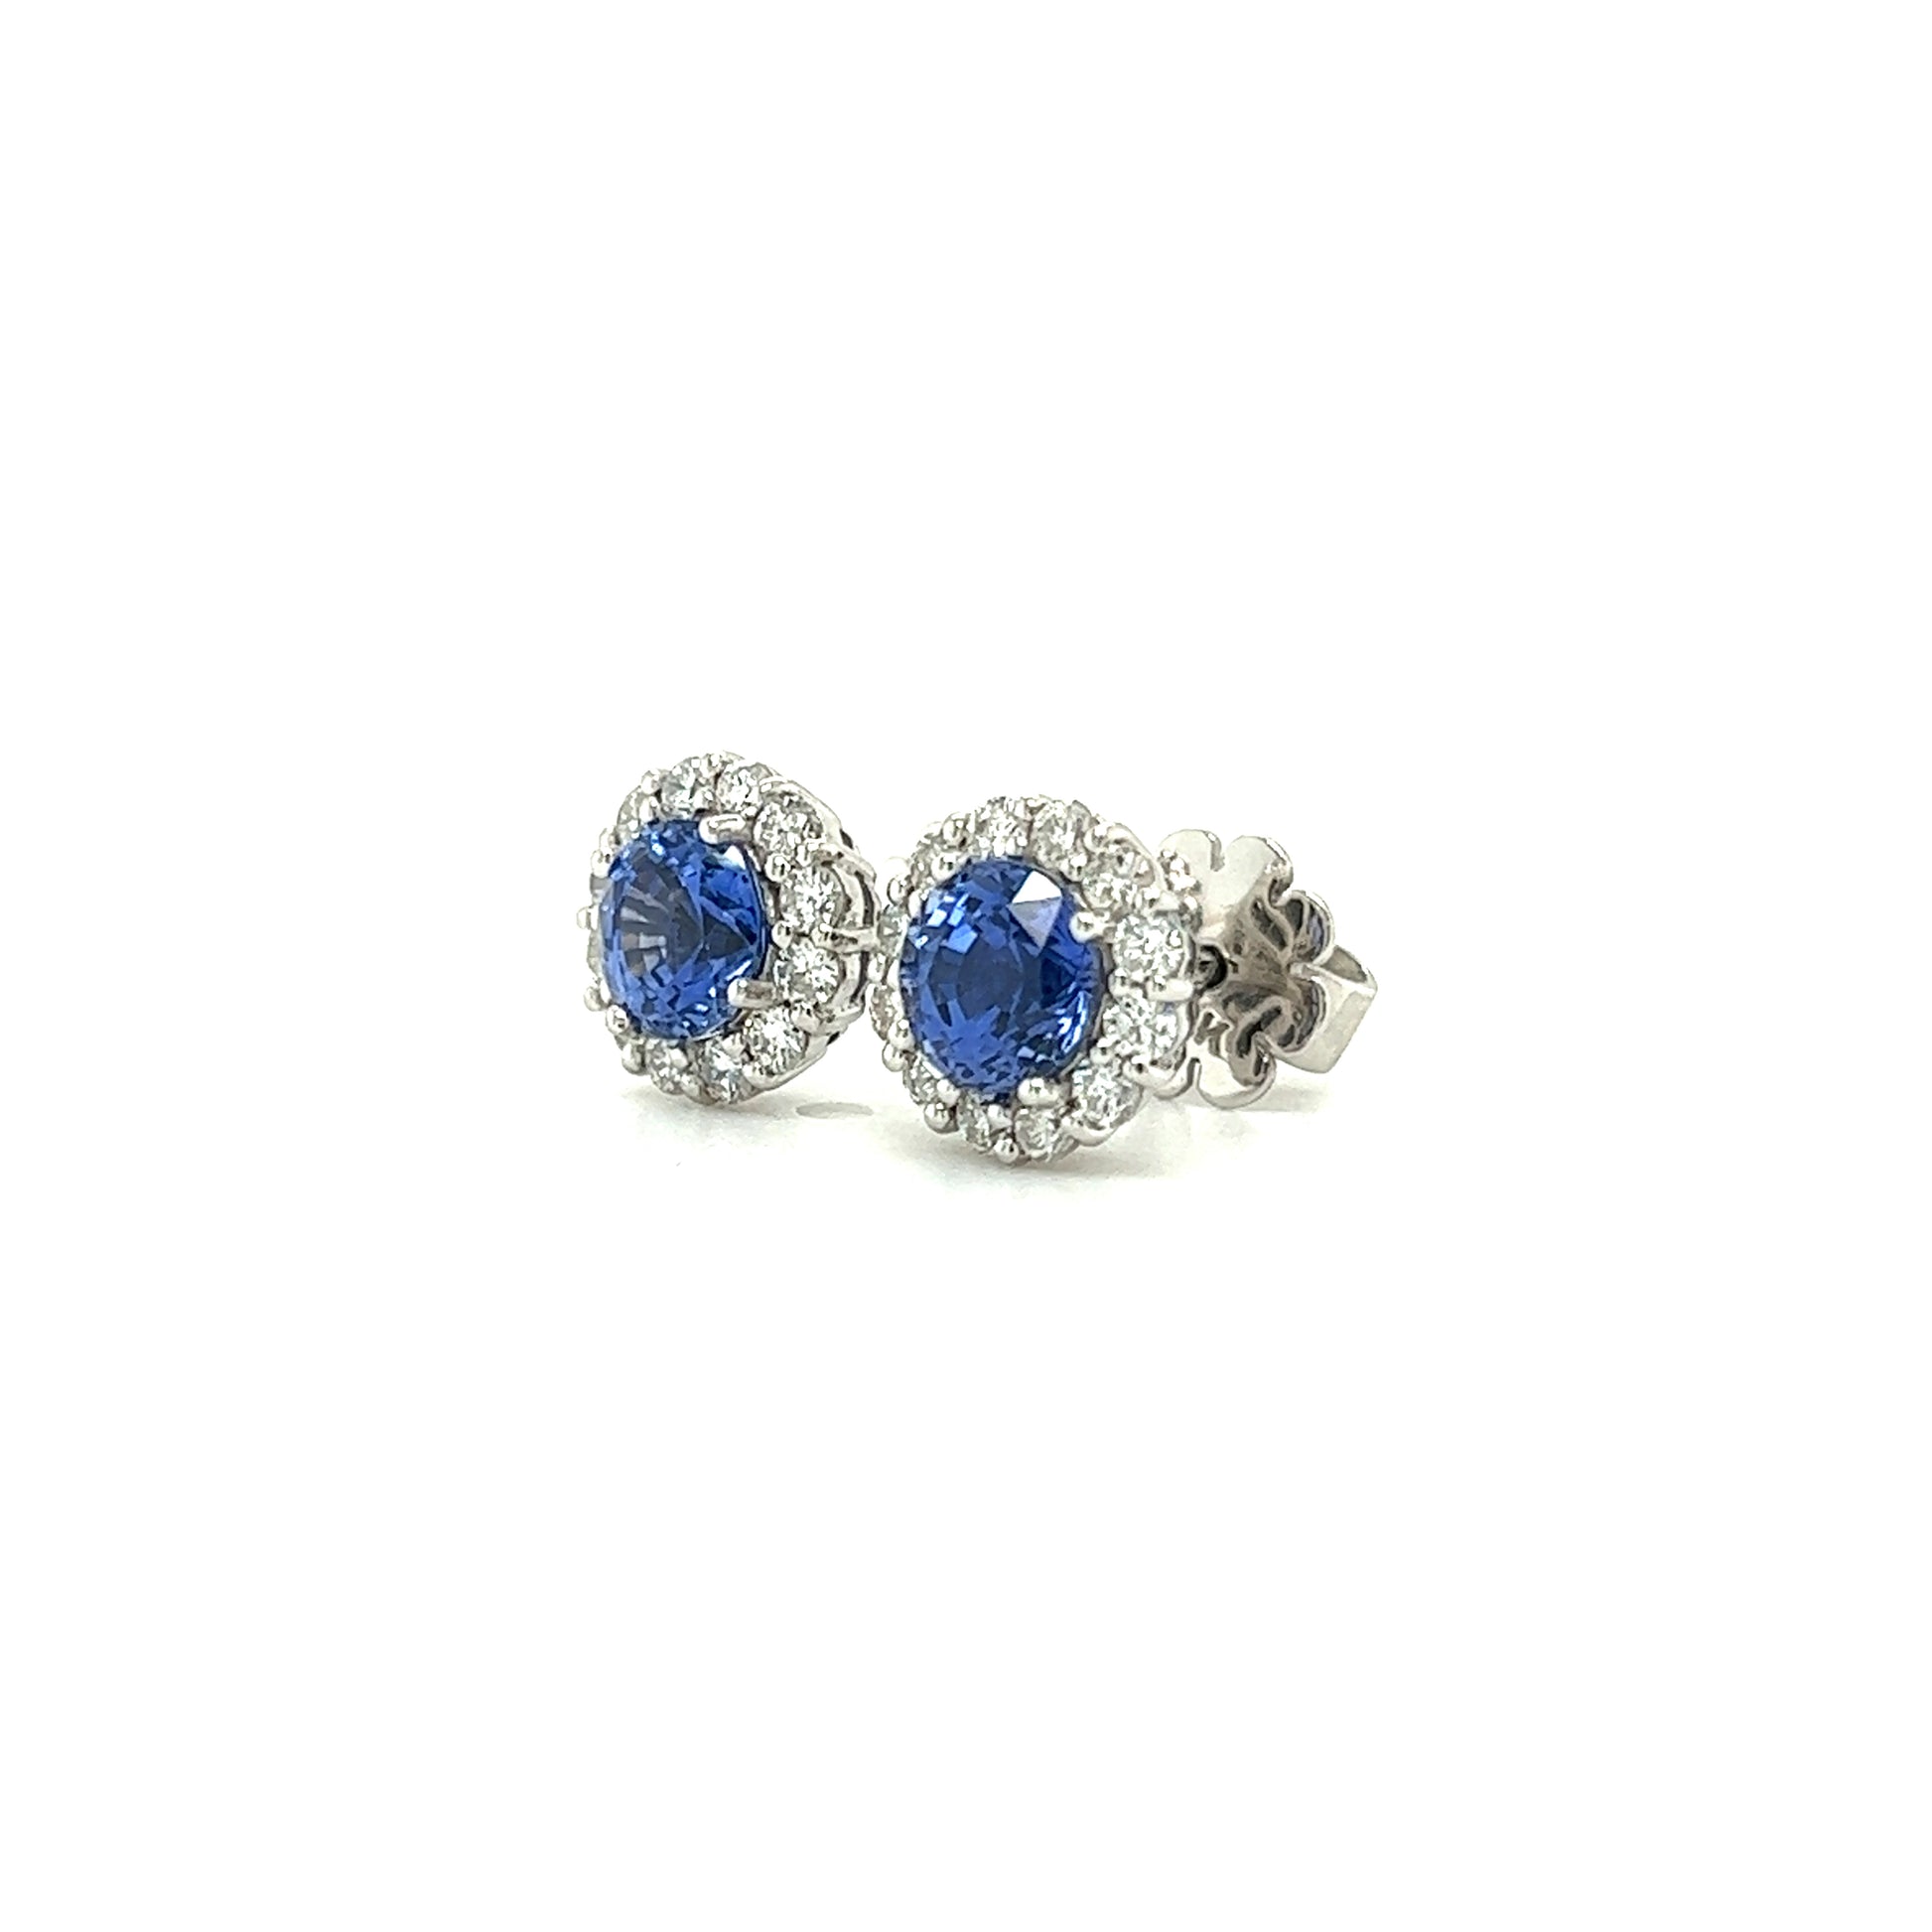 Blue Sapphire Stud Earrings with 0.53ctw of Diamond in 14K White Gold Right Side View